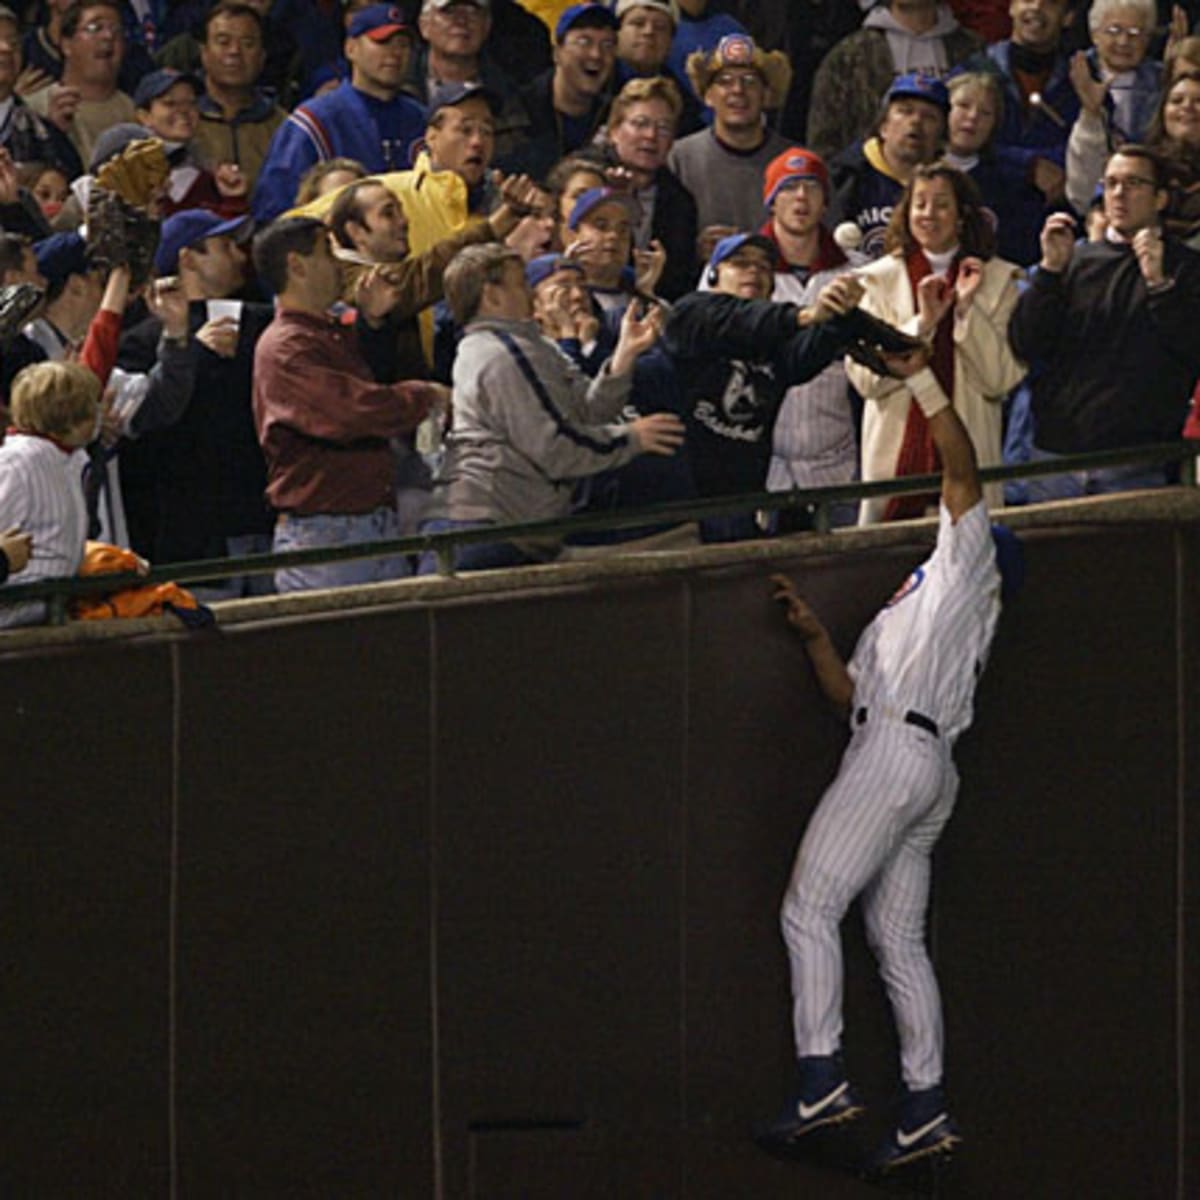 Cubs Survive a Bartman Moment and Are Headed to the Playoffs - The